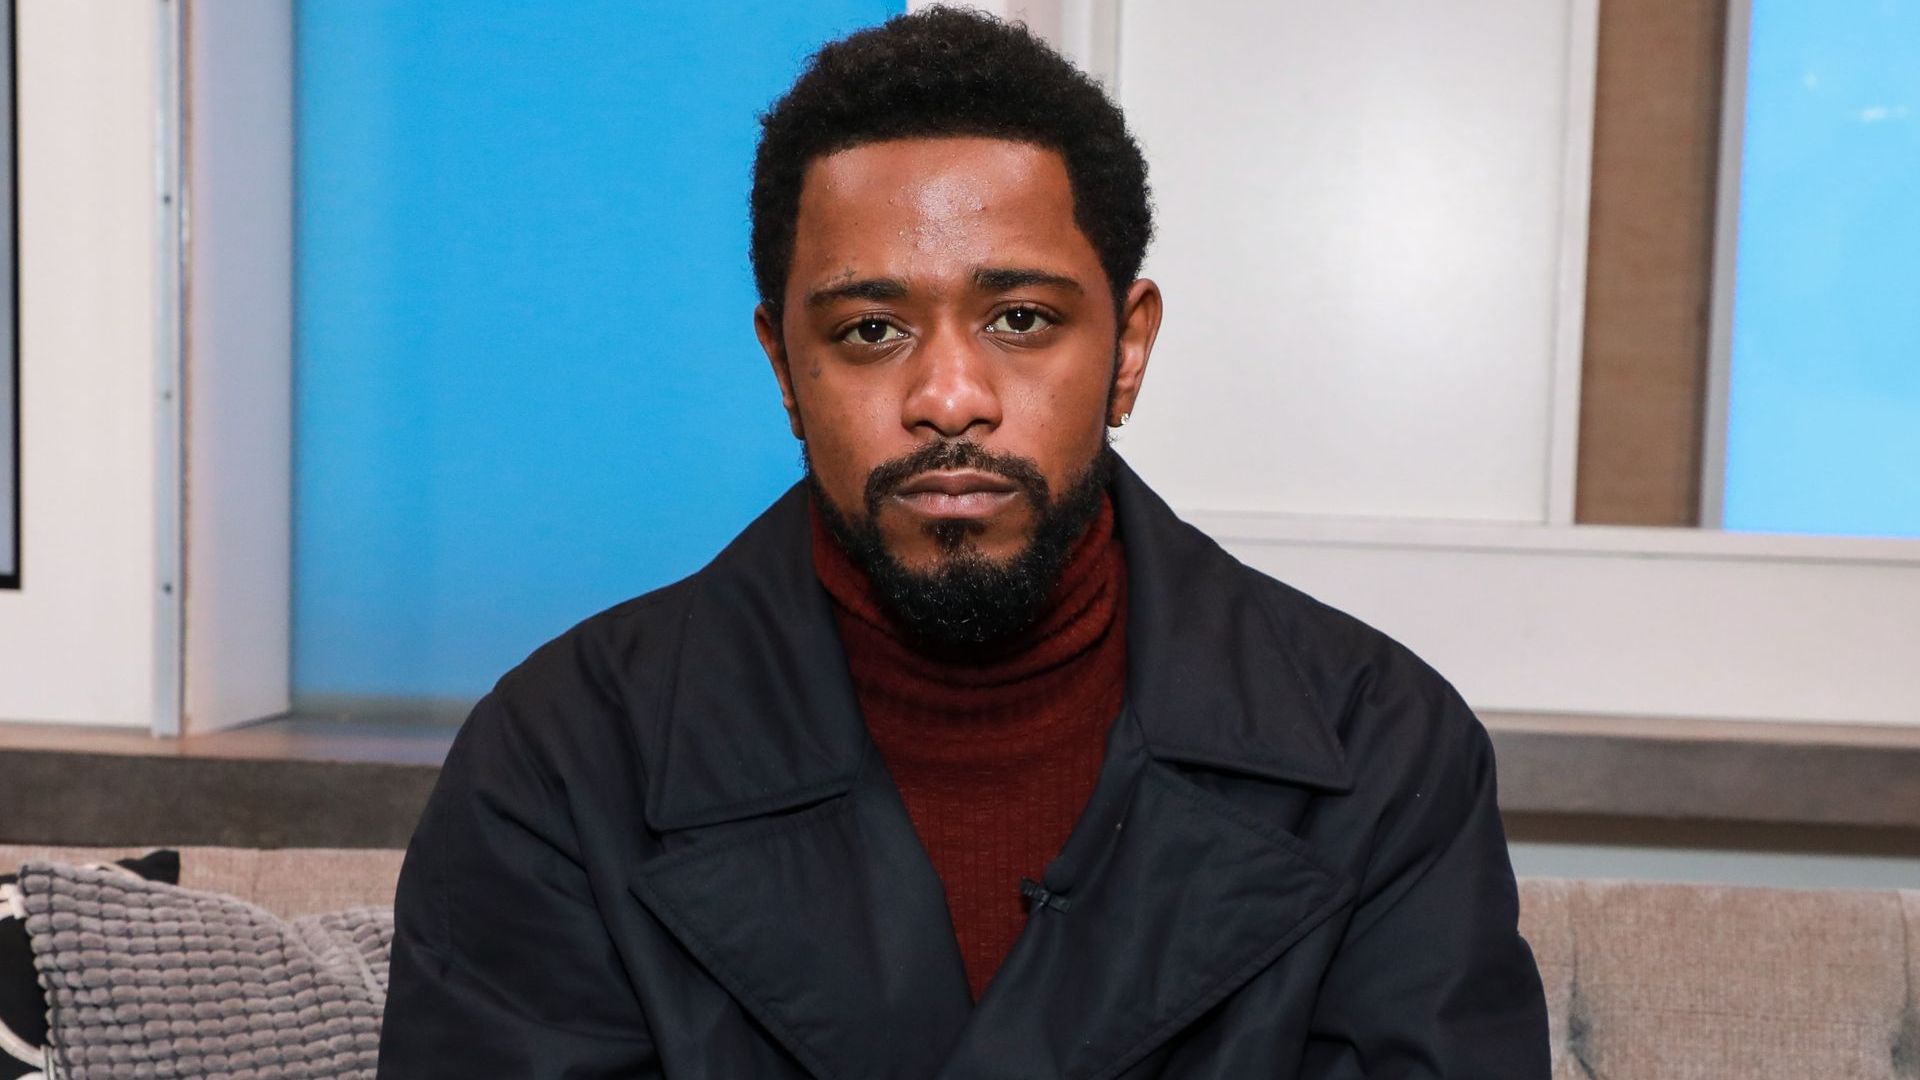 LaKeith Stanfield Slams Charlamagne tha God After ‘Judas and the Black Messiah’ Remark: ‘This is What H**s Do’